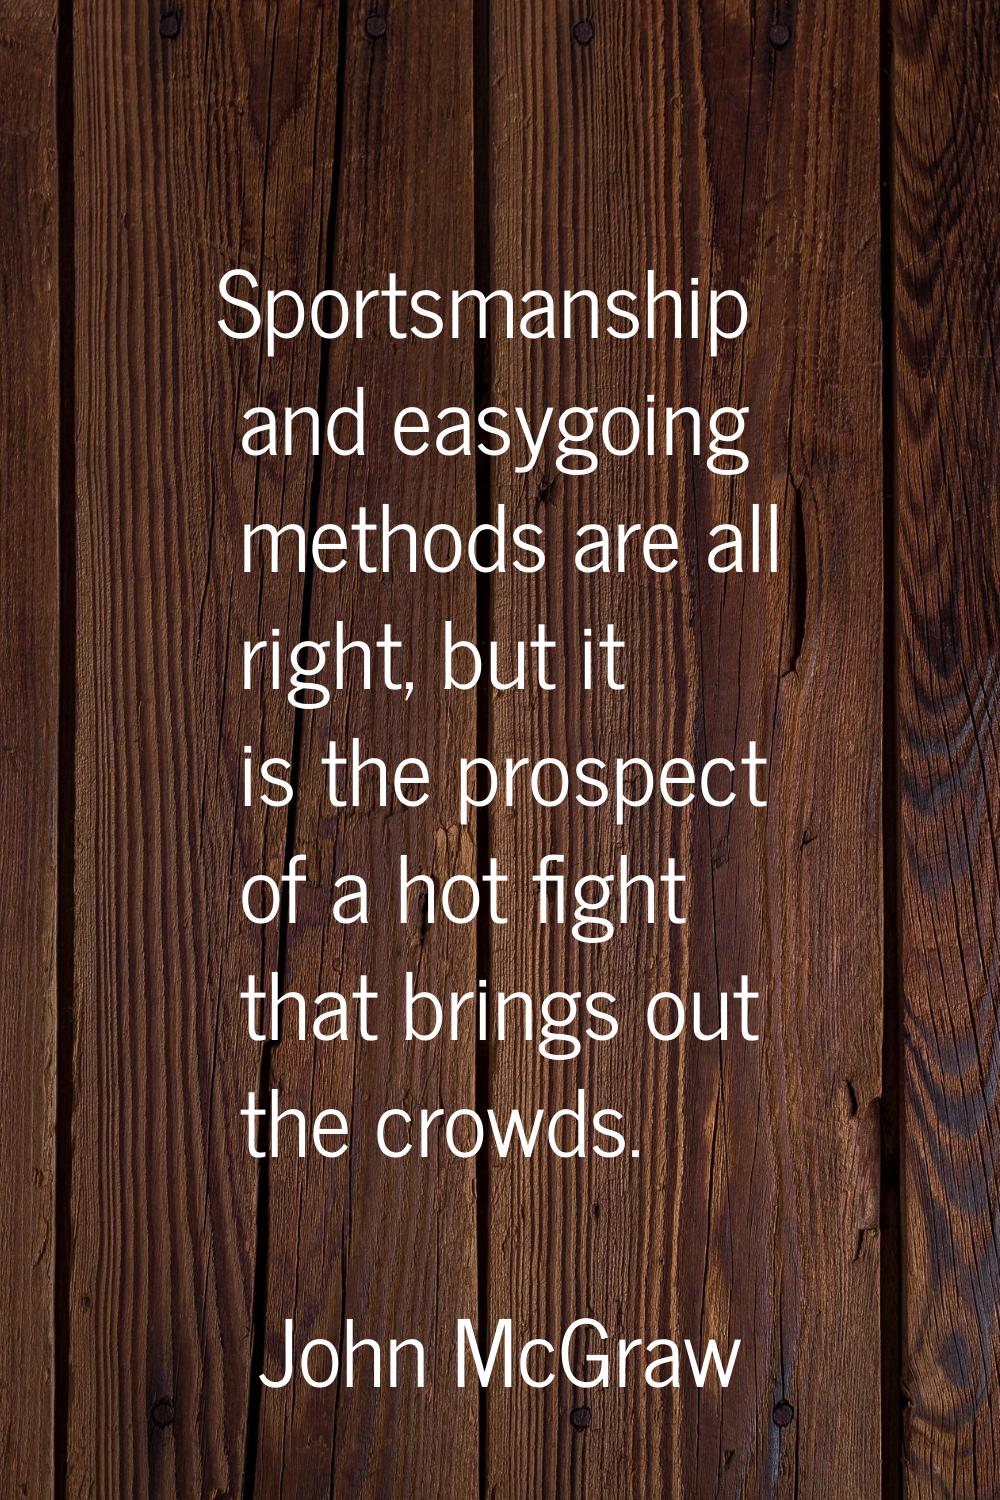 Sportsmanship and easygoing methods are all right, but it is the prospect of a hot fight that bring